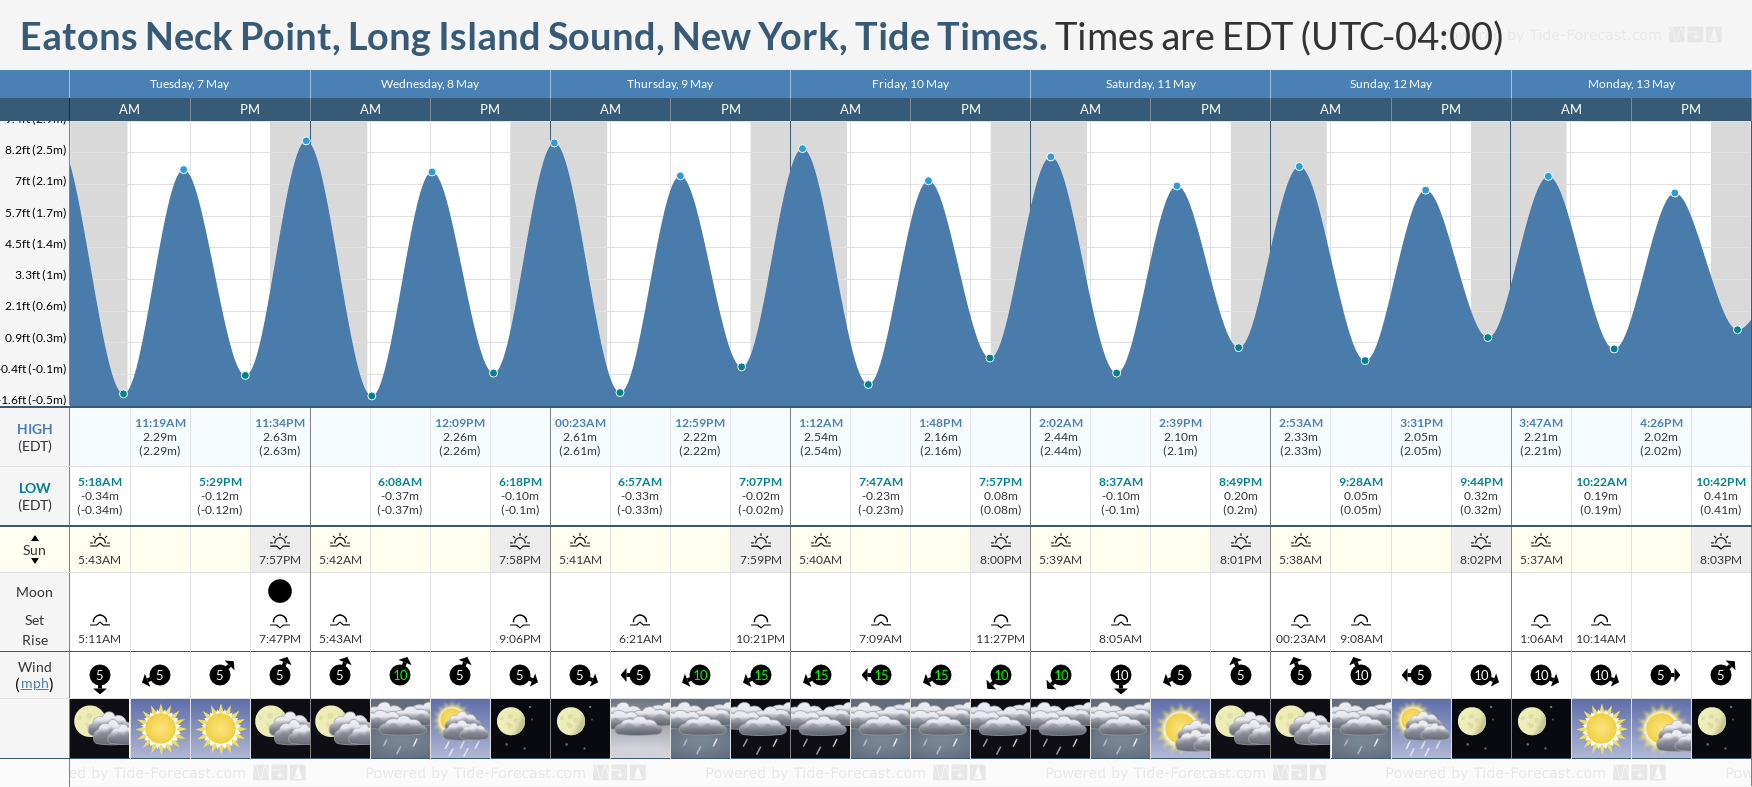 Eatons Neck Point, Long Island Sound, New York Tide Chart including high and low tide tide times for the next 7 days